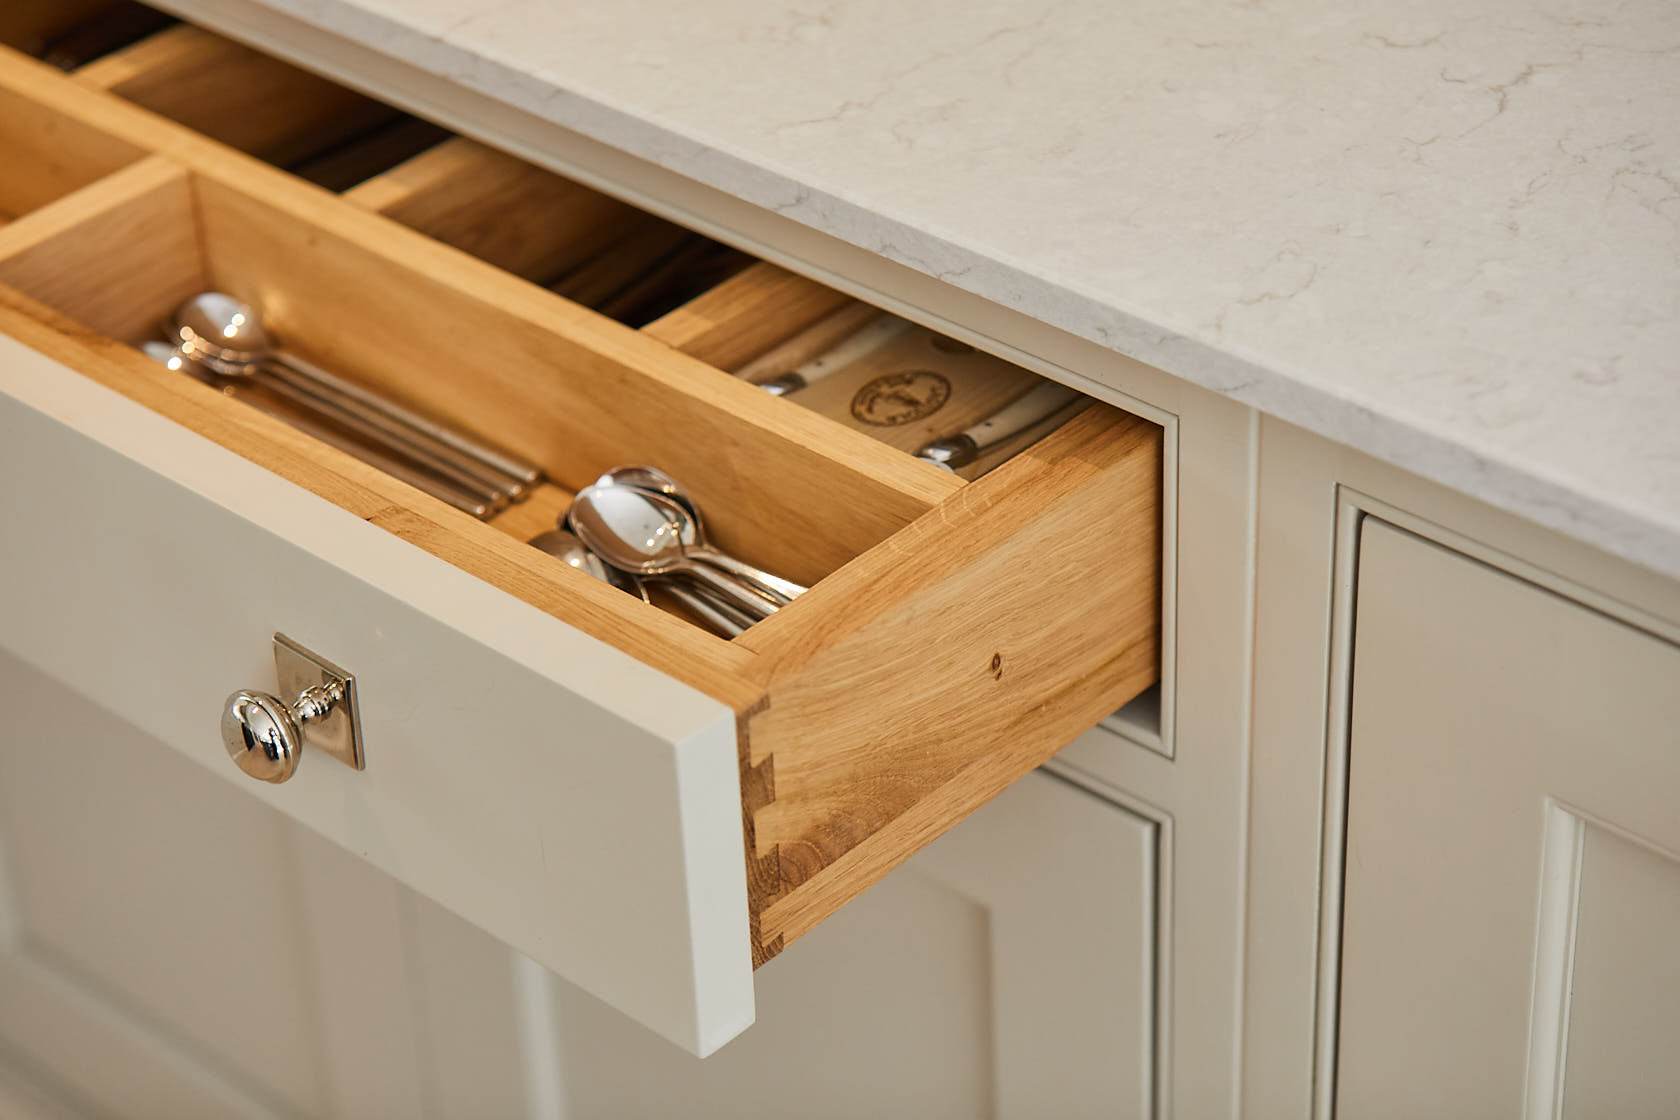 Solid oak drawer box with dovetail joints and cutlery insert